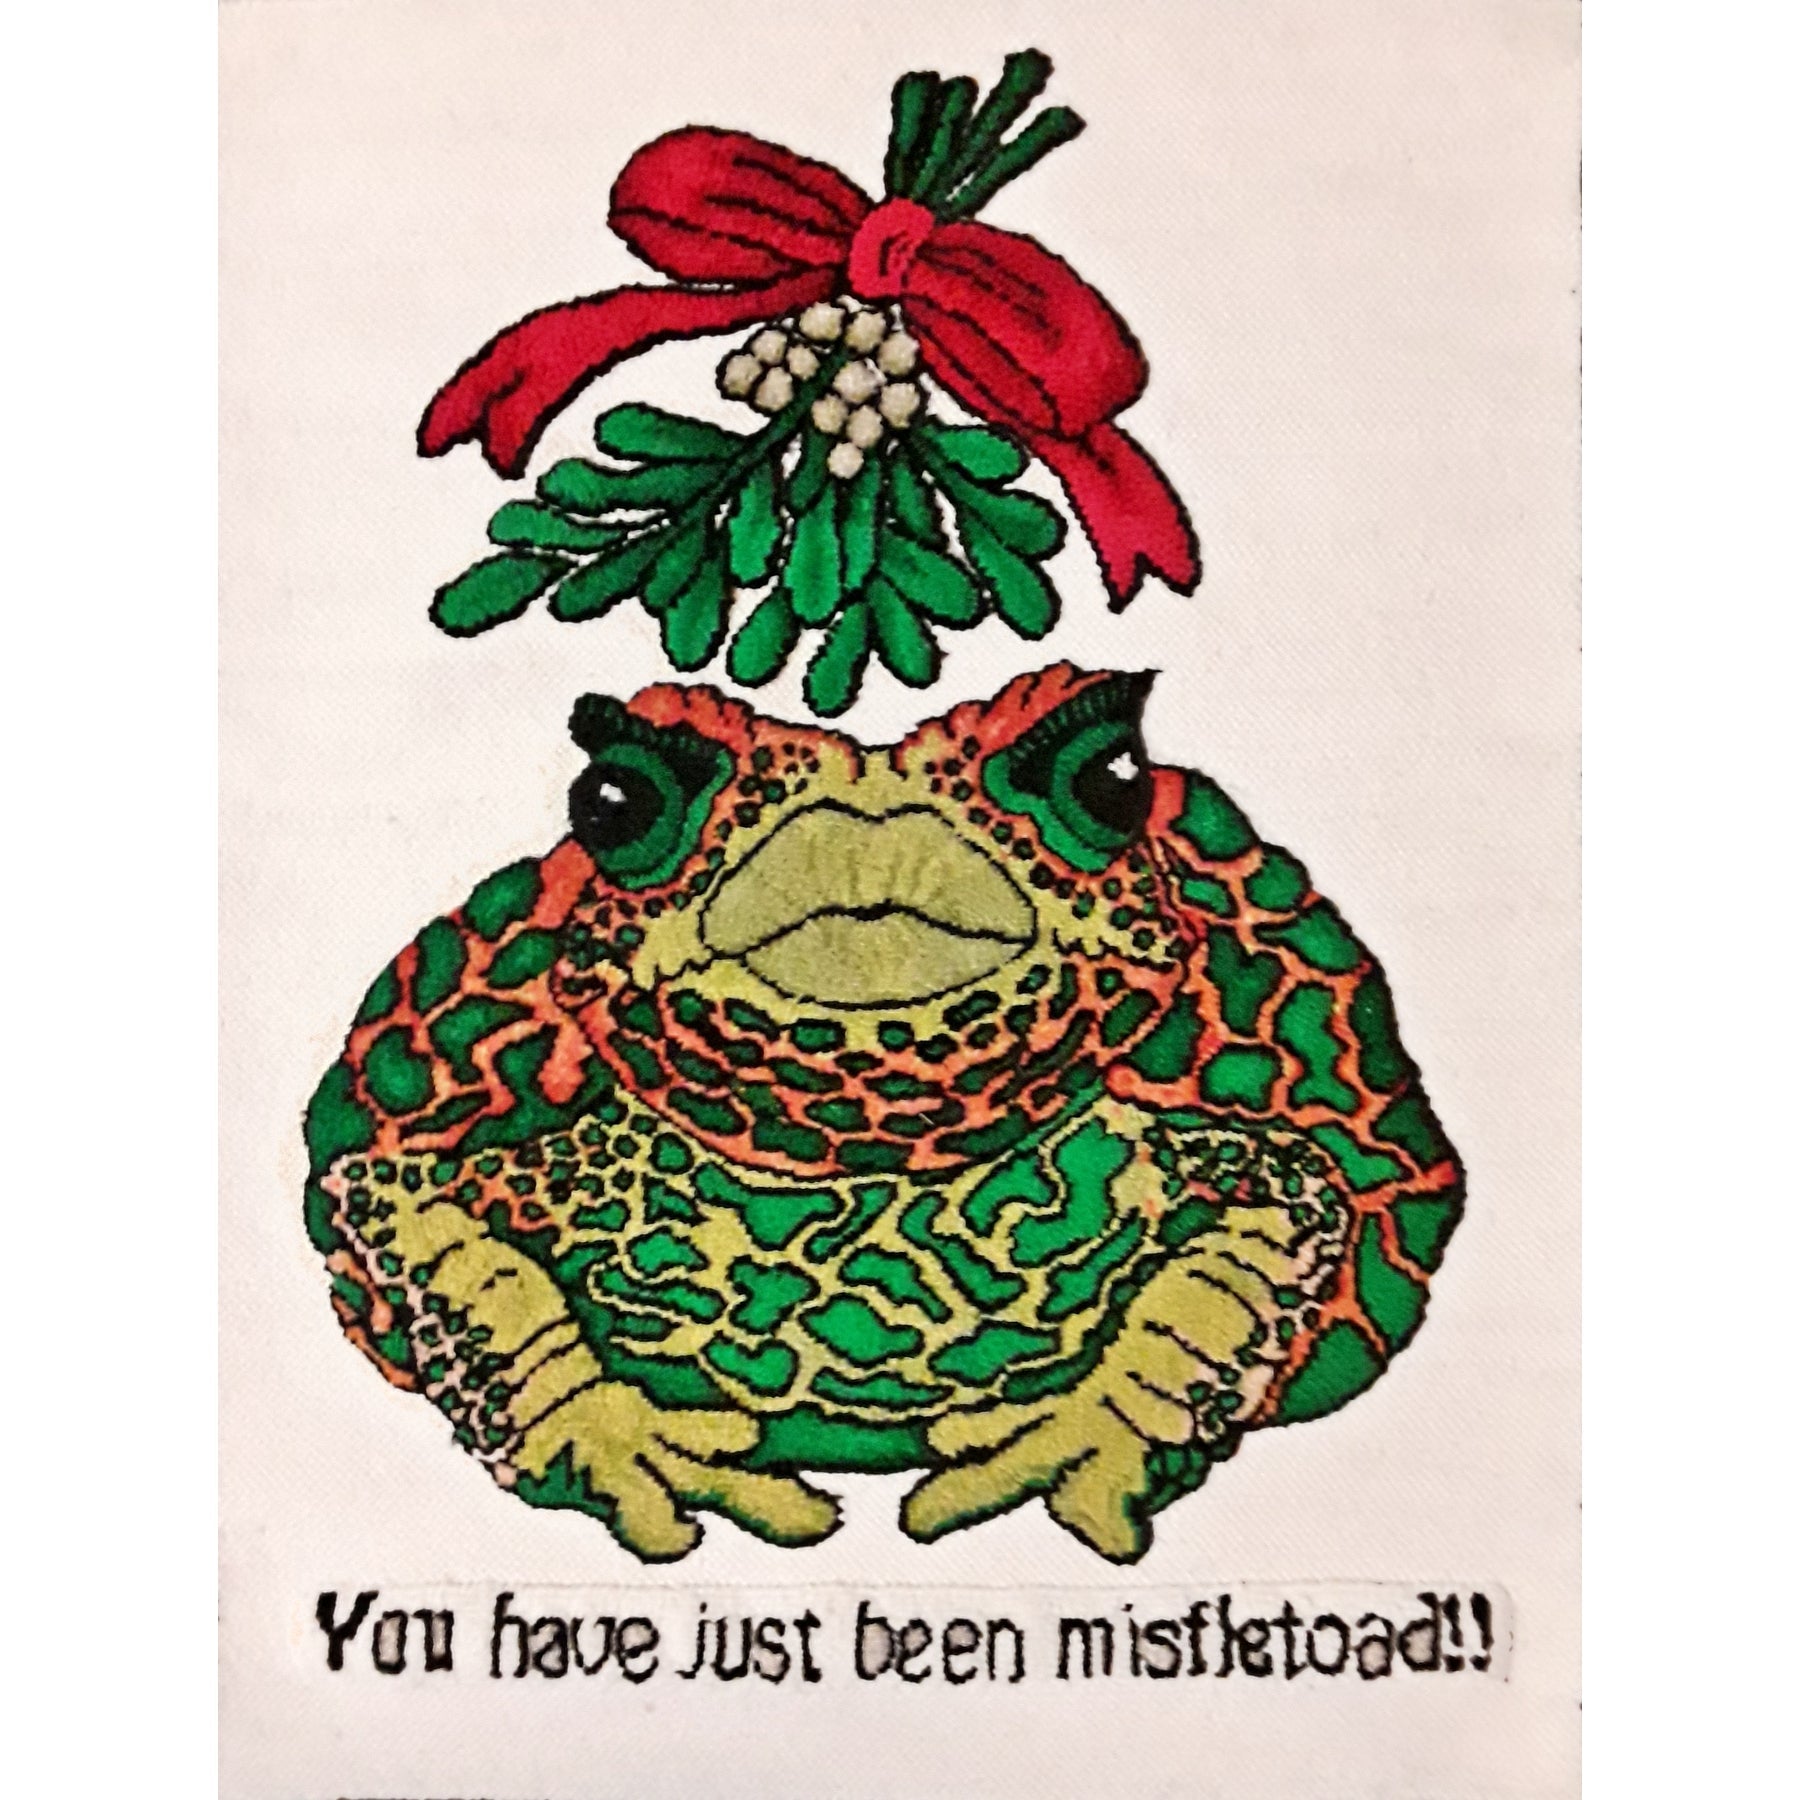 Mistletoad, rug hooked by Tricia Miller